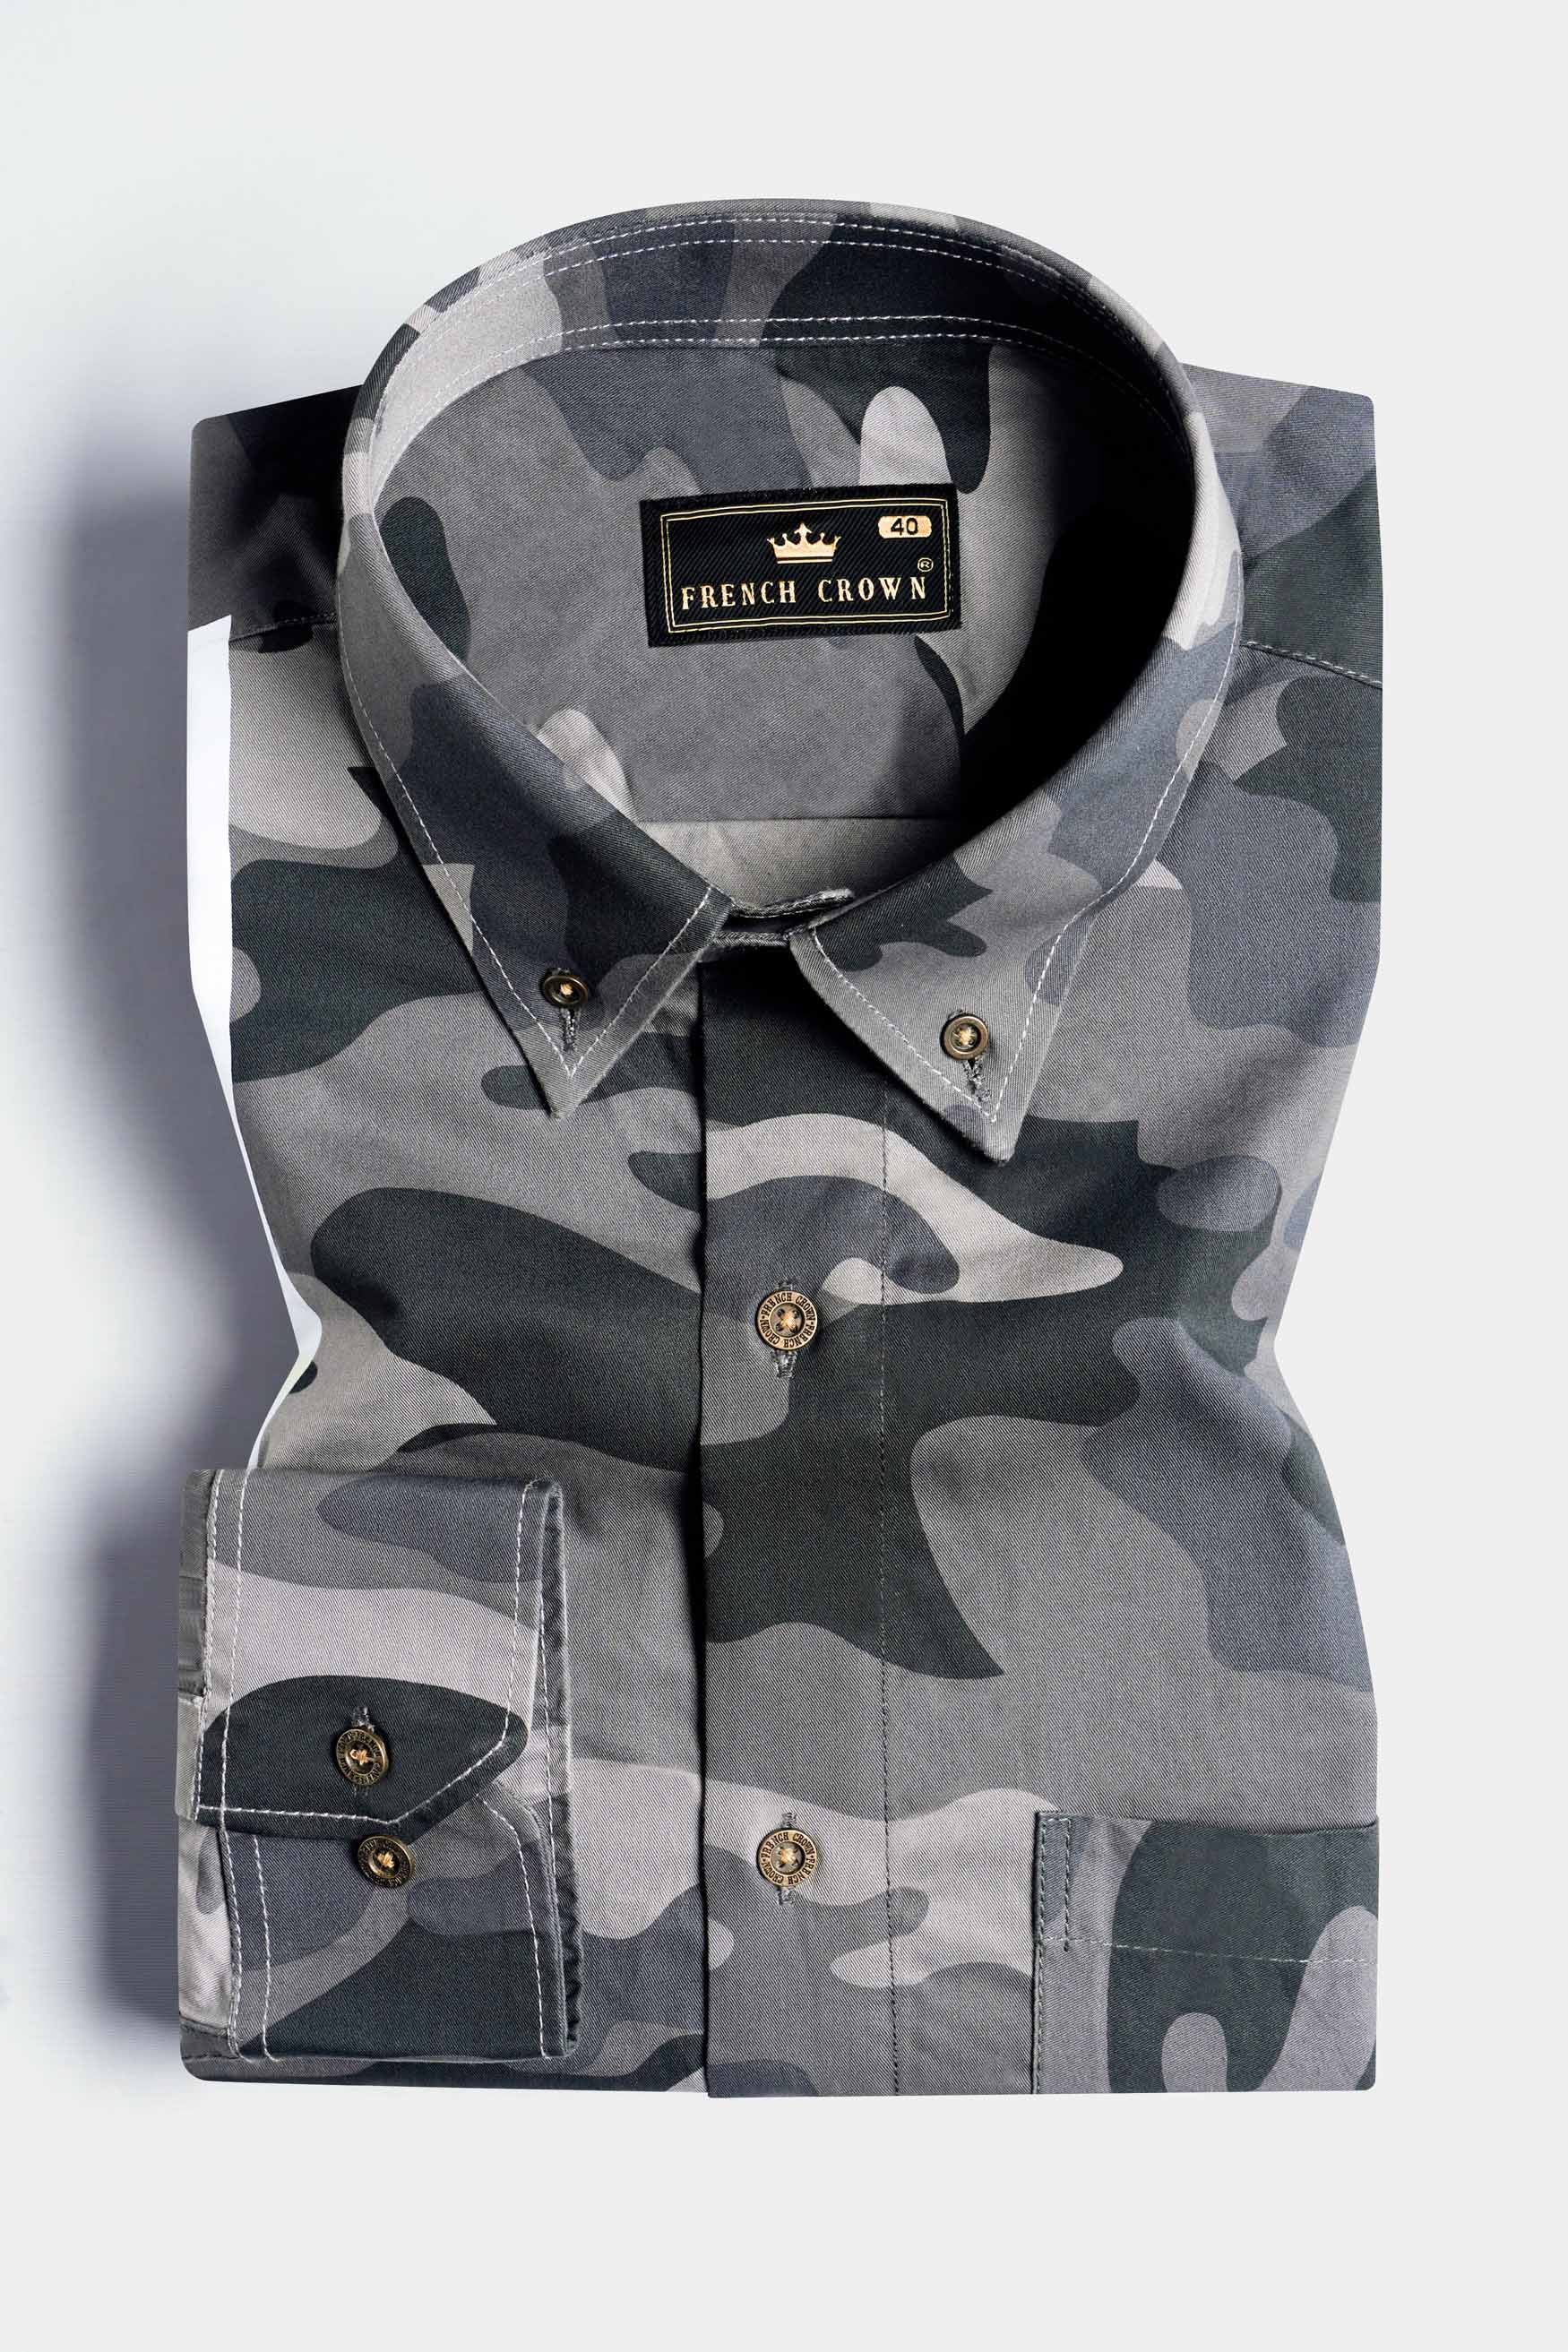 Ironside Gray and Cape Cod Gray Camouflage Printed Royal Oxford Designer Shirt 8892-BD-RPRT114-38, 8892-BD-RPRT114-H-38, 8892-BD-RPRT114-39, 8892-BD-RPRT114-H-39, 8892-BD-RPRT114-40, 8892-BD-RPRT114-H-40, 8892-BD-RPRT114-42, 8892-BD-RPRT114-H-42, 8892-BD-RPRT114-44, 8892-BD-RPRT114-H-44, 8892-BD-RPRT114-46, 8892-BD-RPRT114-H-46, 8892-BD-RPRT114-48, 8892-BD-RPRT114-H-48, 8892-BD-RPRT114-50, 8892-BD-RPRT114-H-50, 8892-BD-RPRT114-52, 8892-BD-RPRT114-H-52